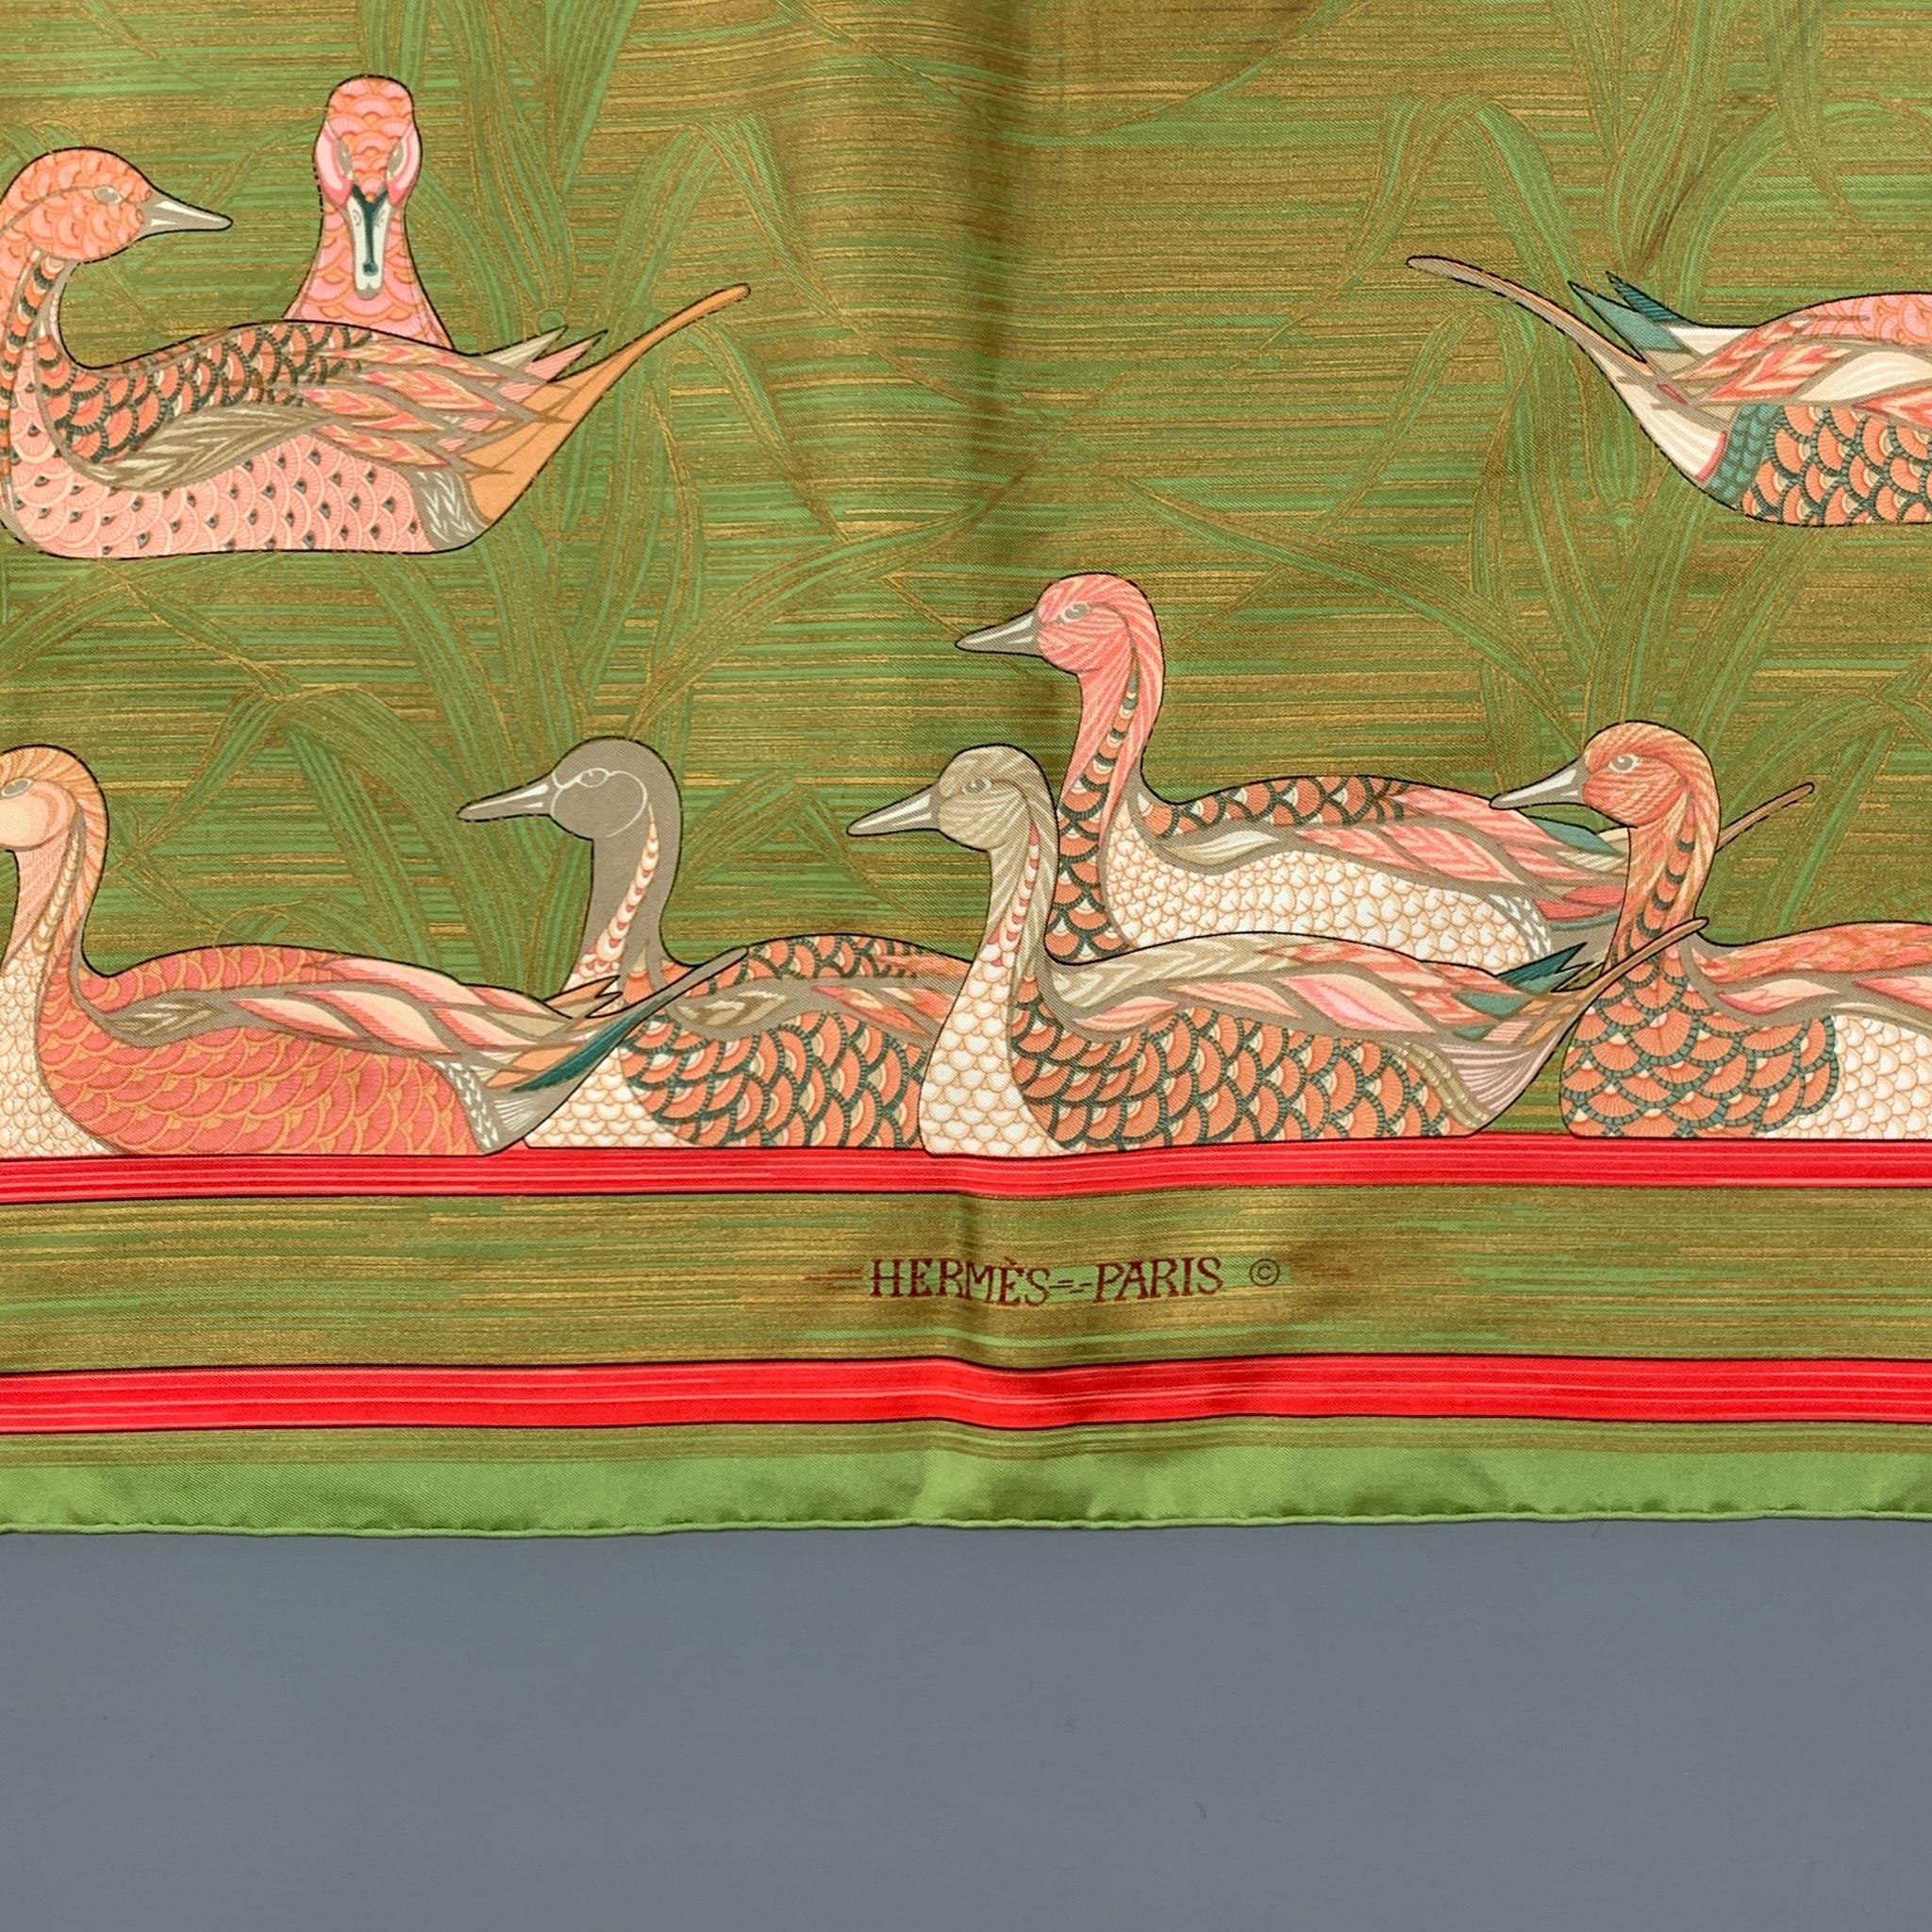 HERMES 'LA MARE AUX CANARDS' Designed by Daphne Duchesne in 1981 scarf comes in a green & pink print silk. Made in France. 

Very Good Pre-Owned Condition. Light marks. As-Is. 

Measurements:

36 in. x 35 in. 